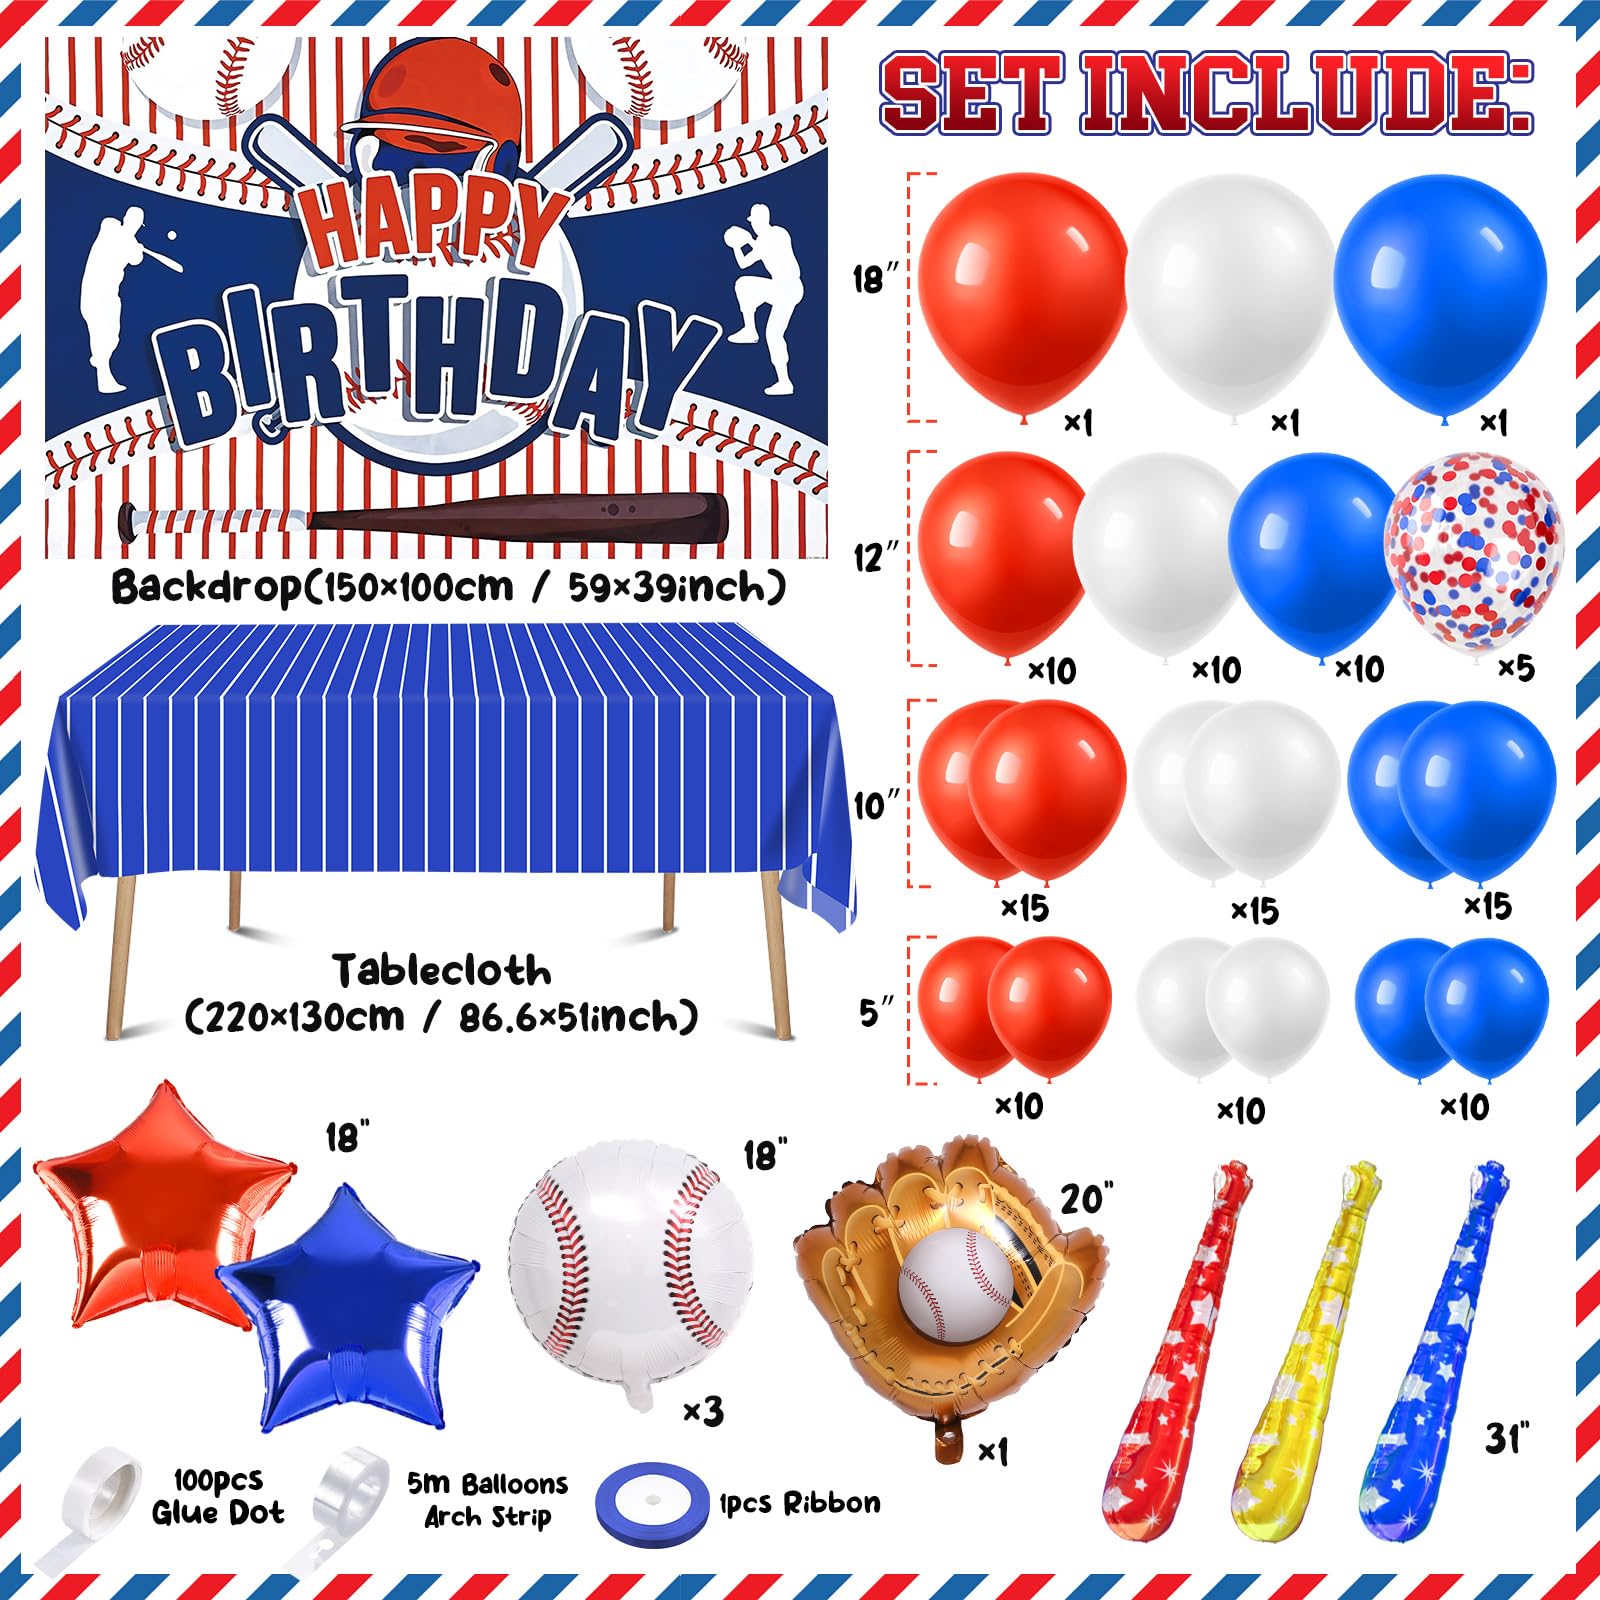 Winrayk 127Pcs Baseball Birthday Party Decorations Supplies Red White and Blue Baseball Balloon Arch Backdrop Tablecloth Star Glove Baseball Foil Balloon, Teen Kids Girls Boys Sports Party Decorations